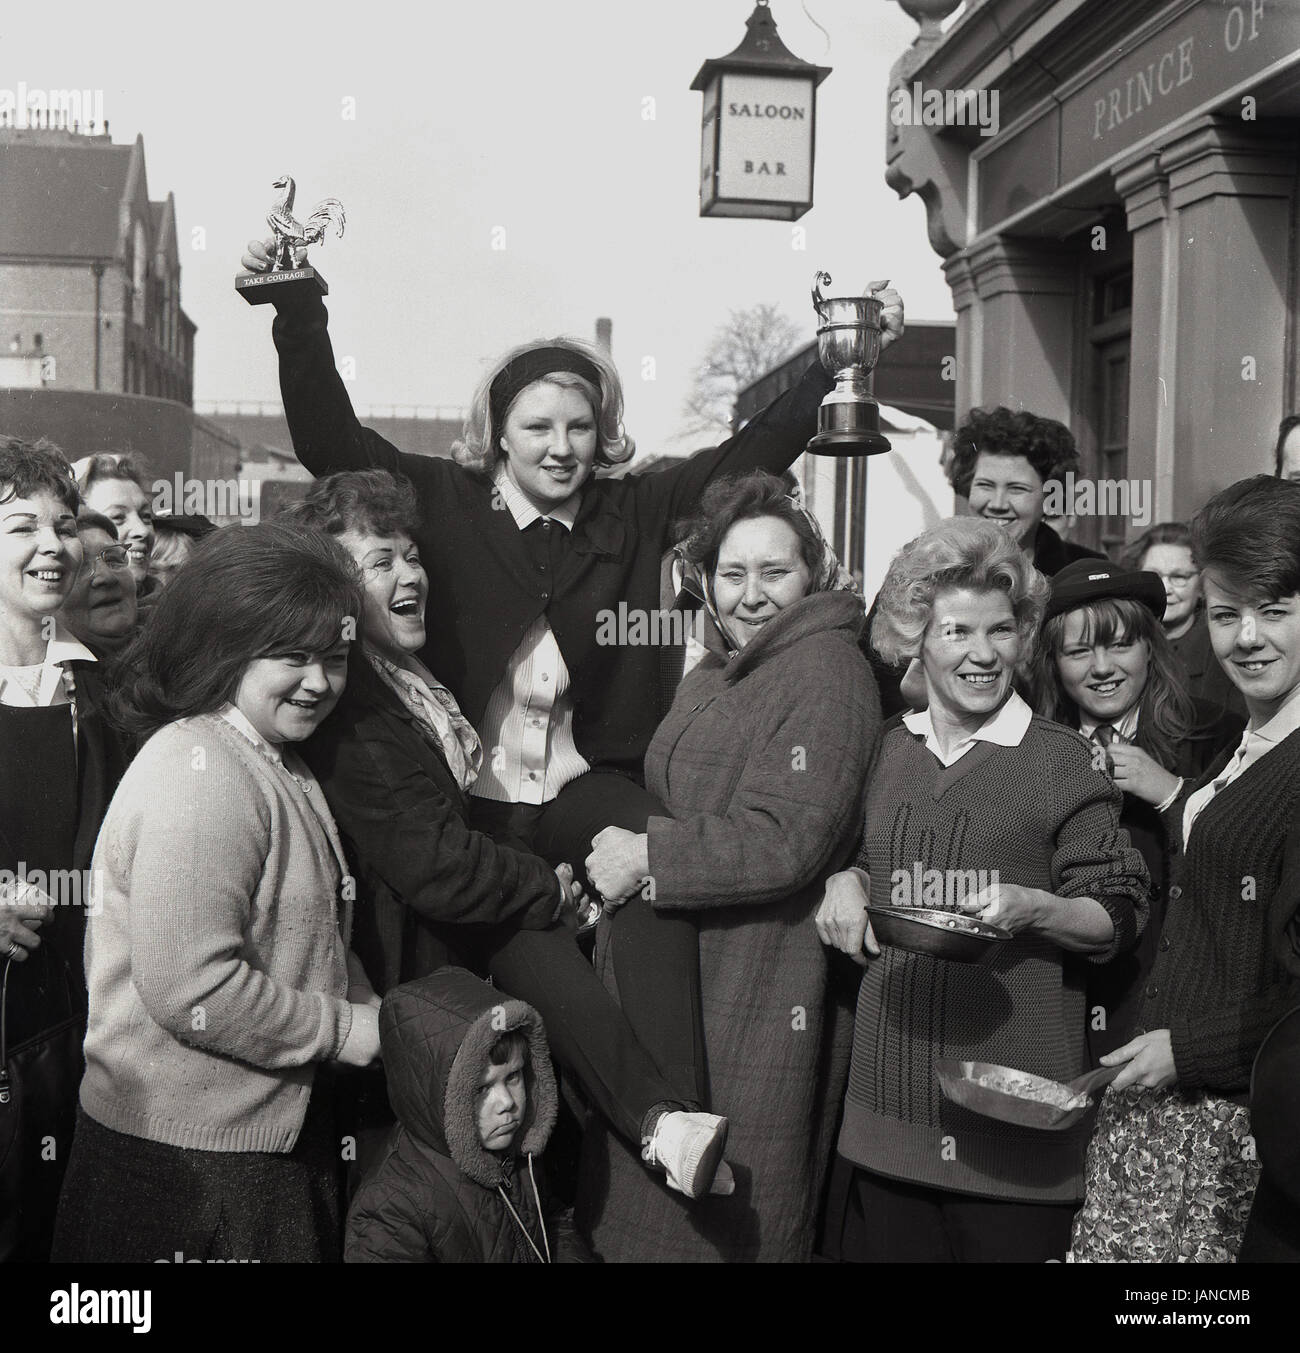 1965, historical, picture shows the winning lady holding aloft her trophies outside the Prince of Wales pub in the annual pancake race on the Old Kent Road, London, SE1. Stock Photo